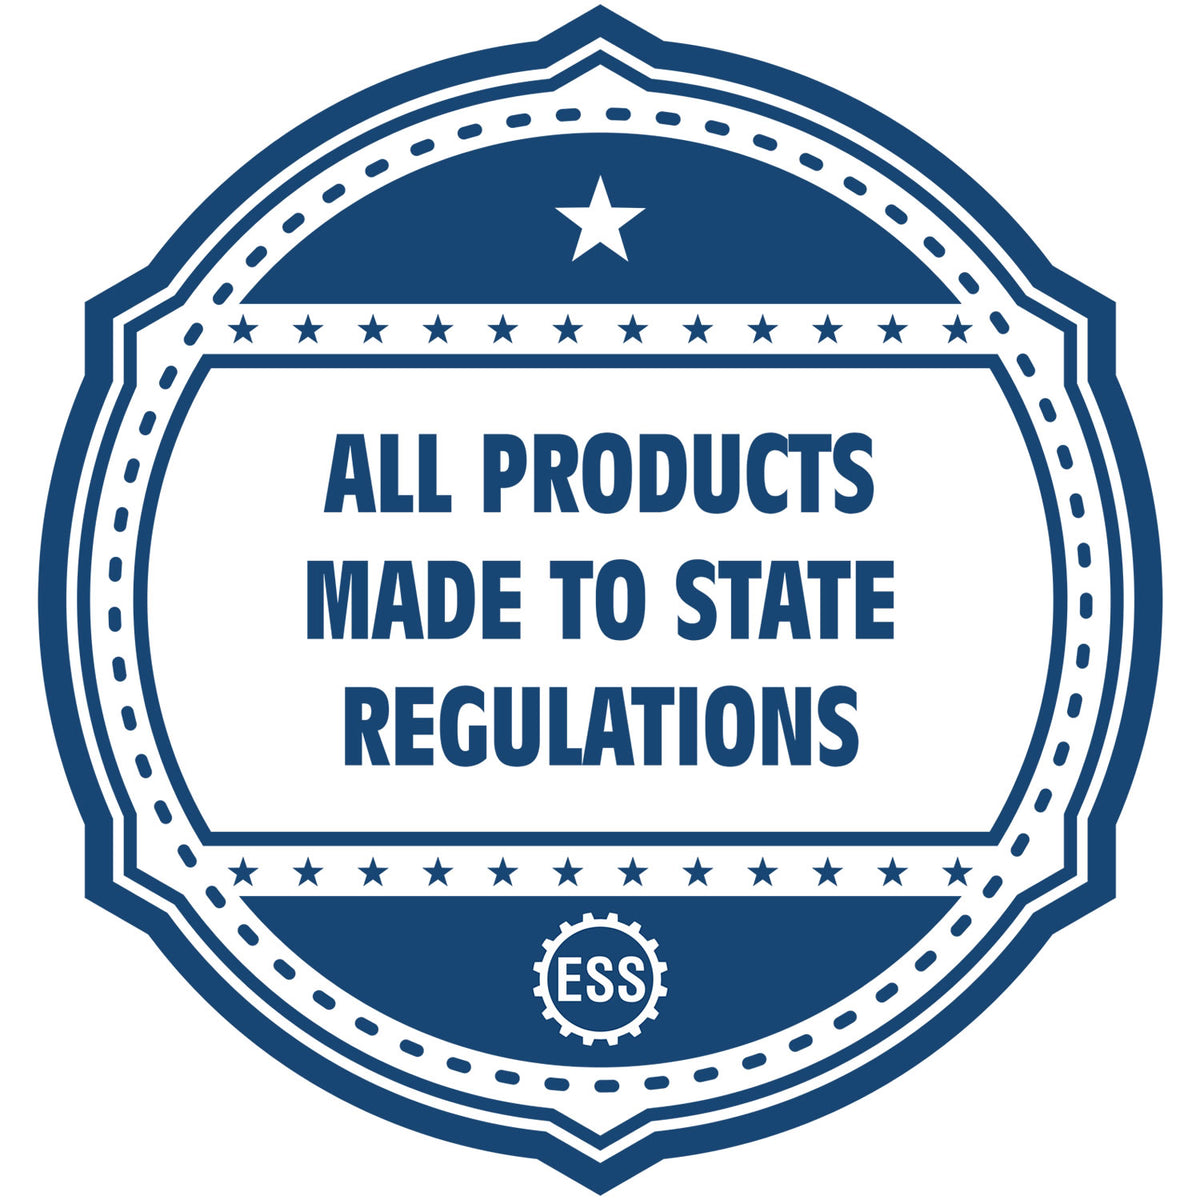 An icon or badge element for the Digital Rhode Island Landscape Architect Stamp showing that this product is made in compliance with state regulations.